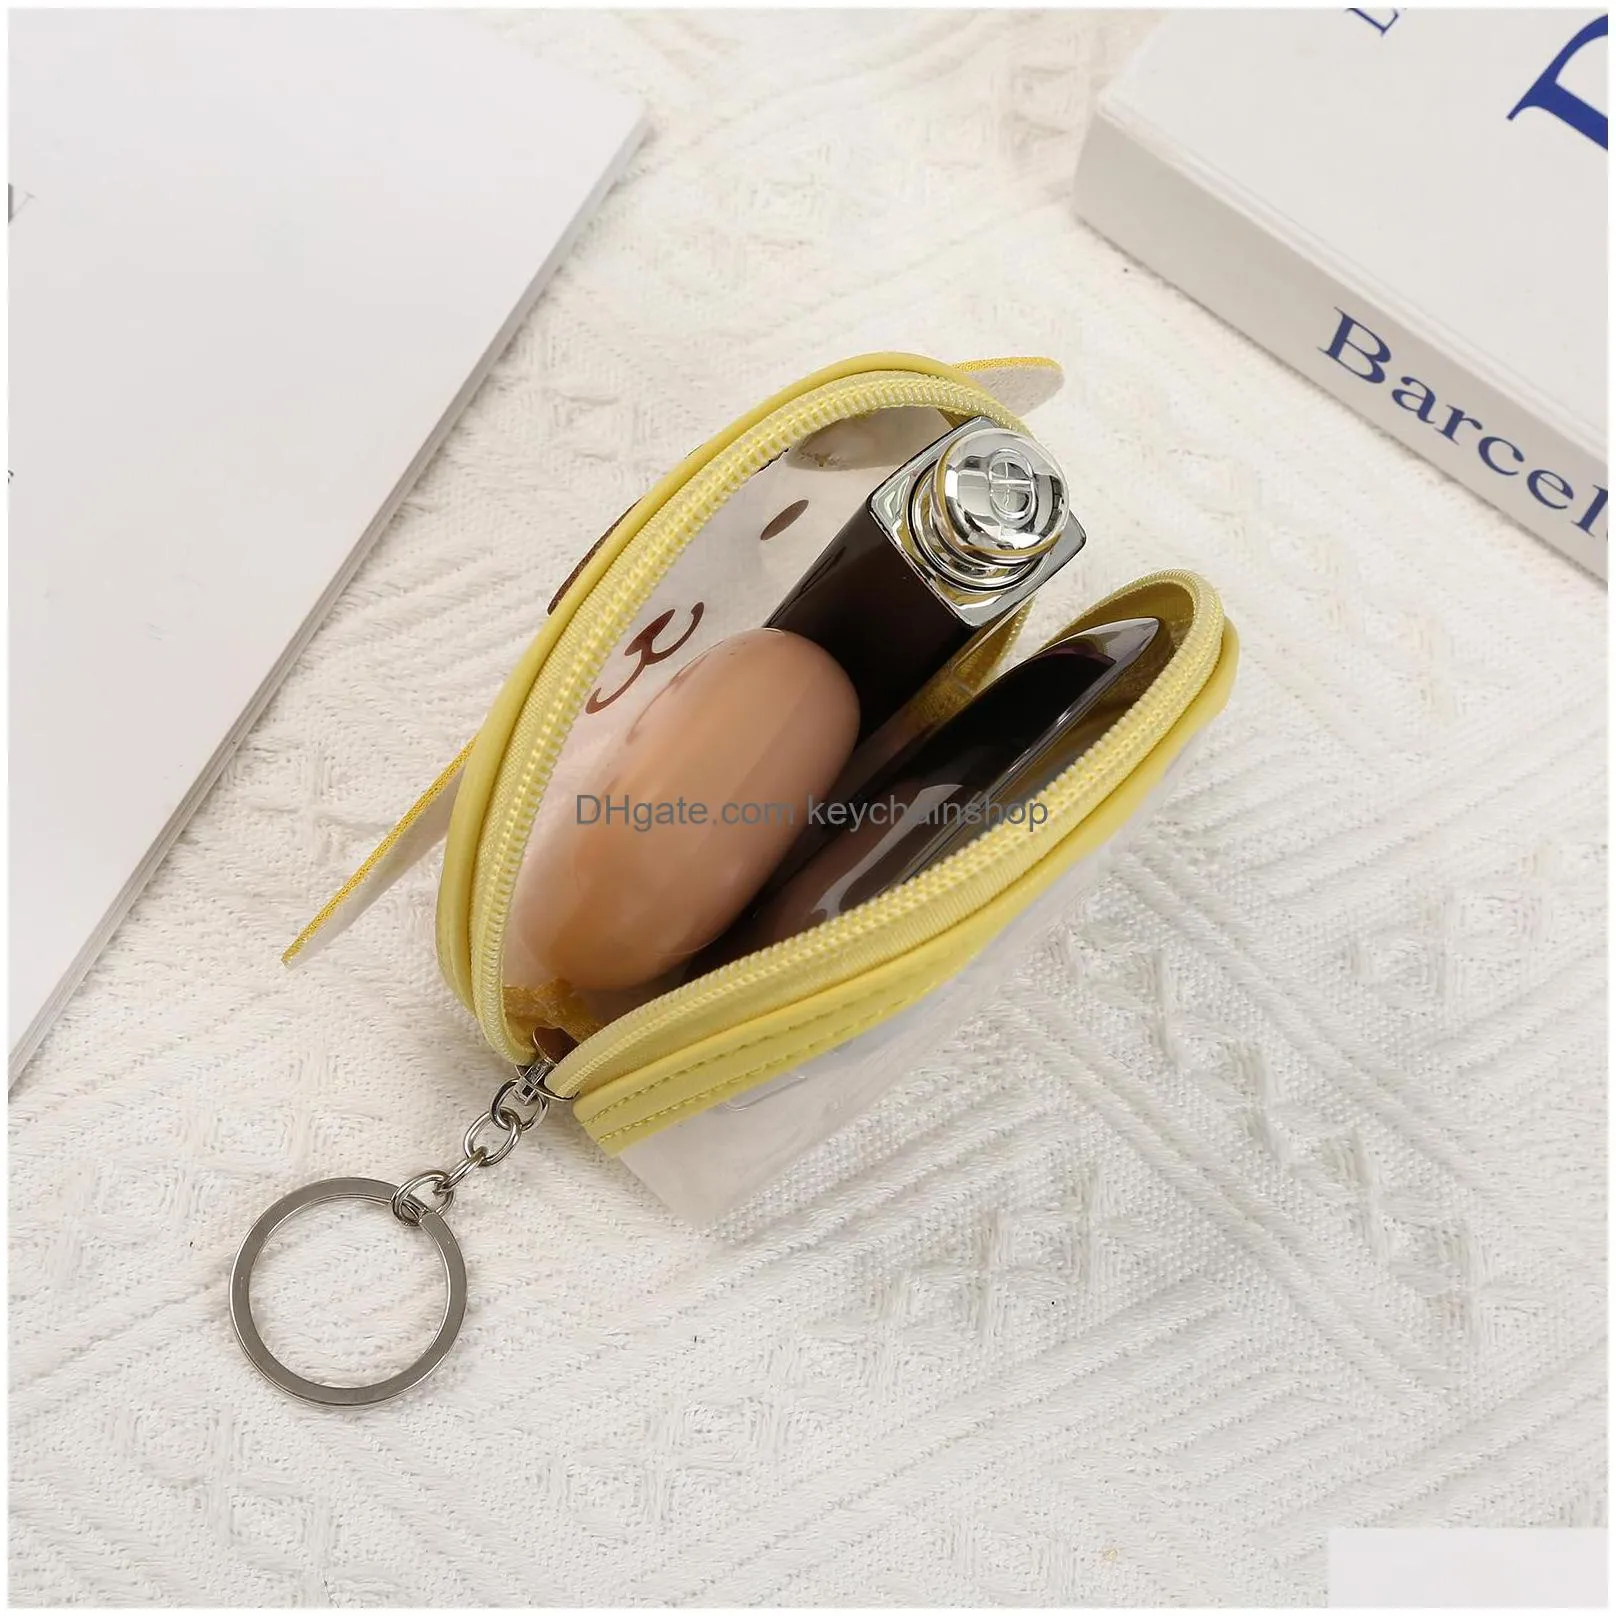 coin purses case keychains rings cute bear cat rabbit owl pvc car keyrings holder gifts animal design bag pendant charms fashion key chains jewelry